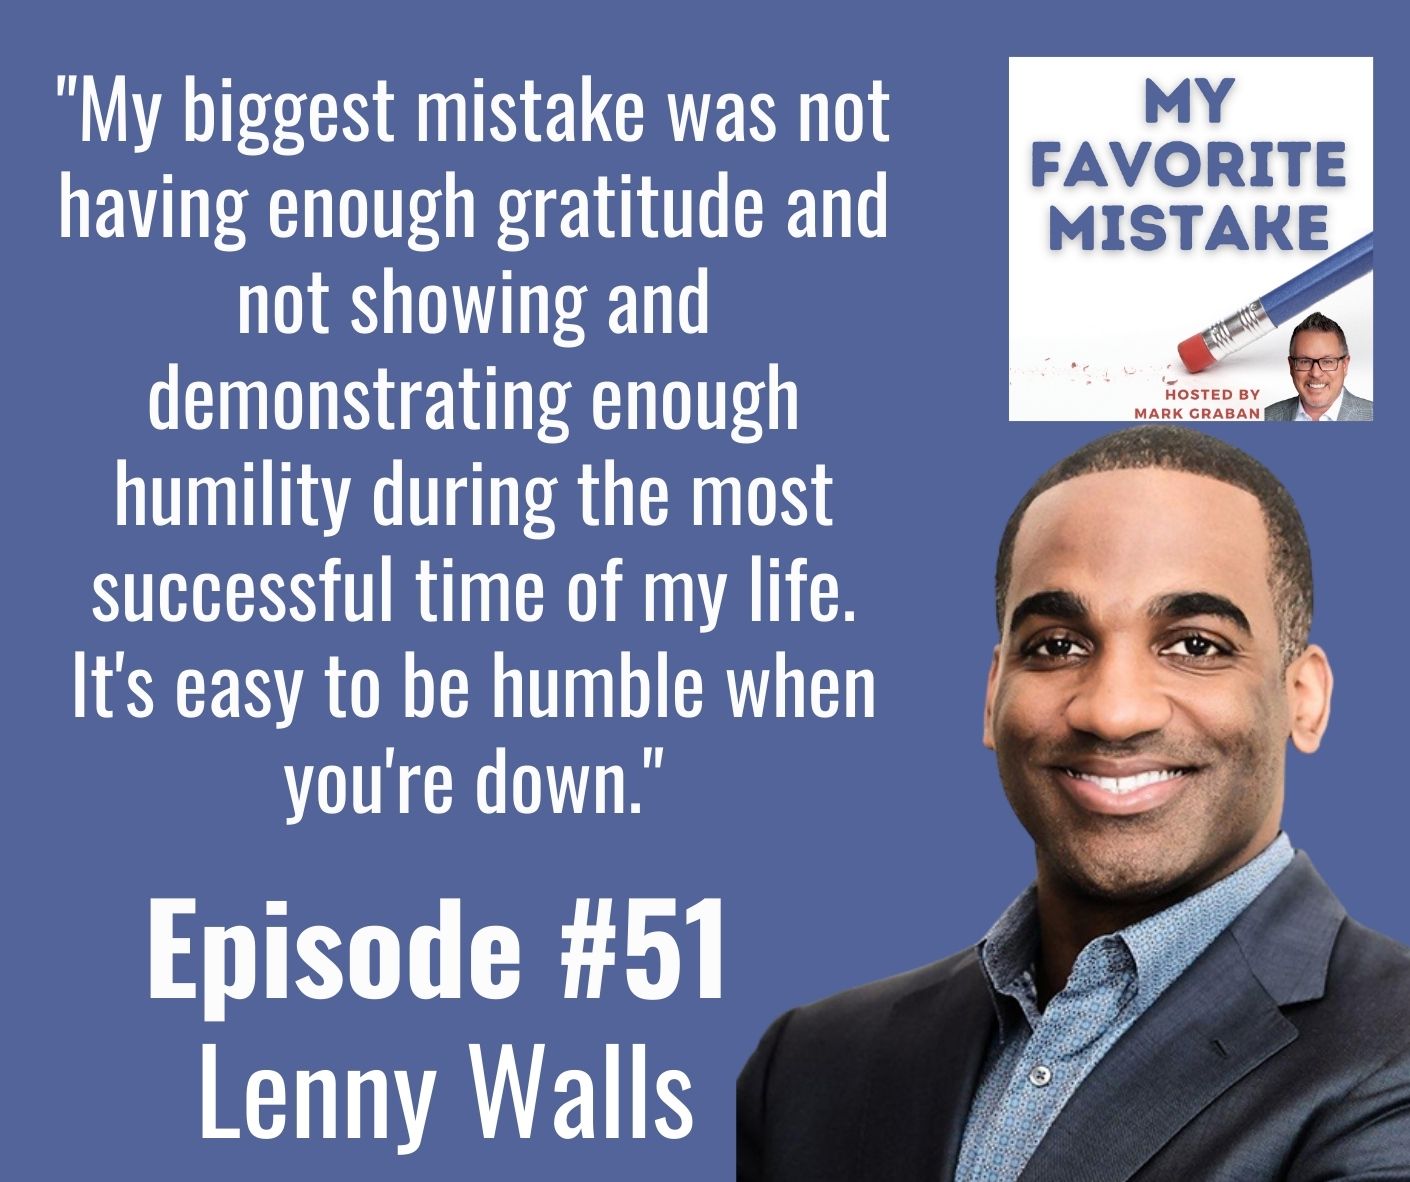 "My biggest mistake was not having enough gratitude and not showing and demonstrating enough humility during the most successful time of my life. It's easy to be humble when you're down."